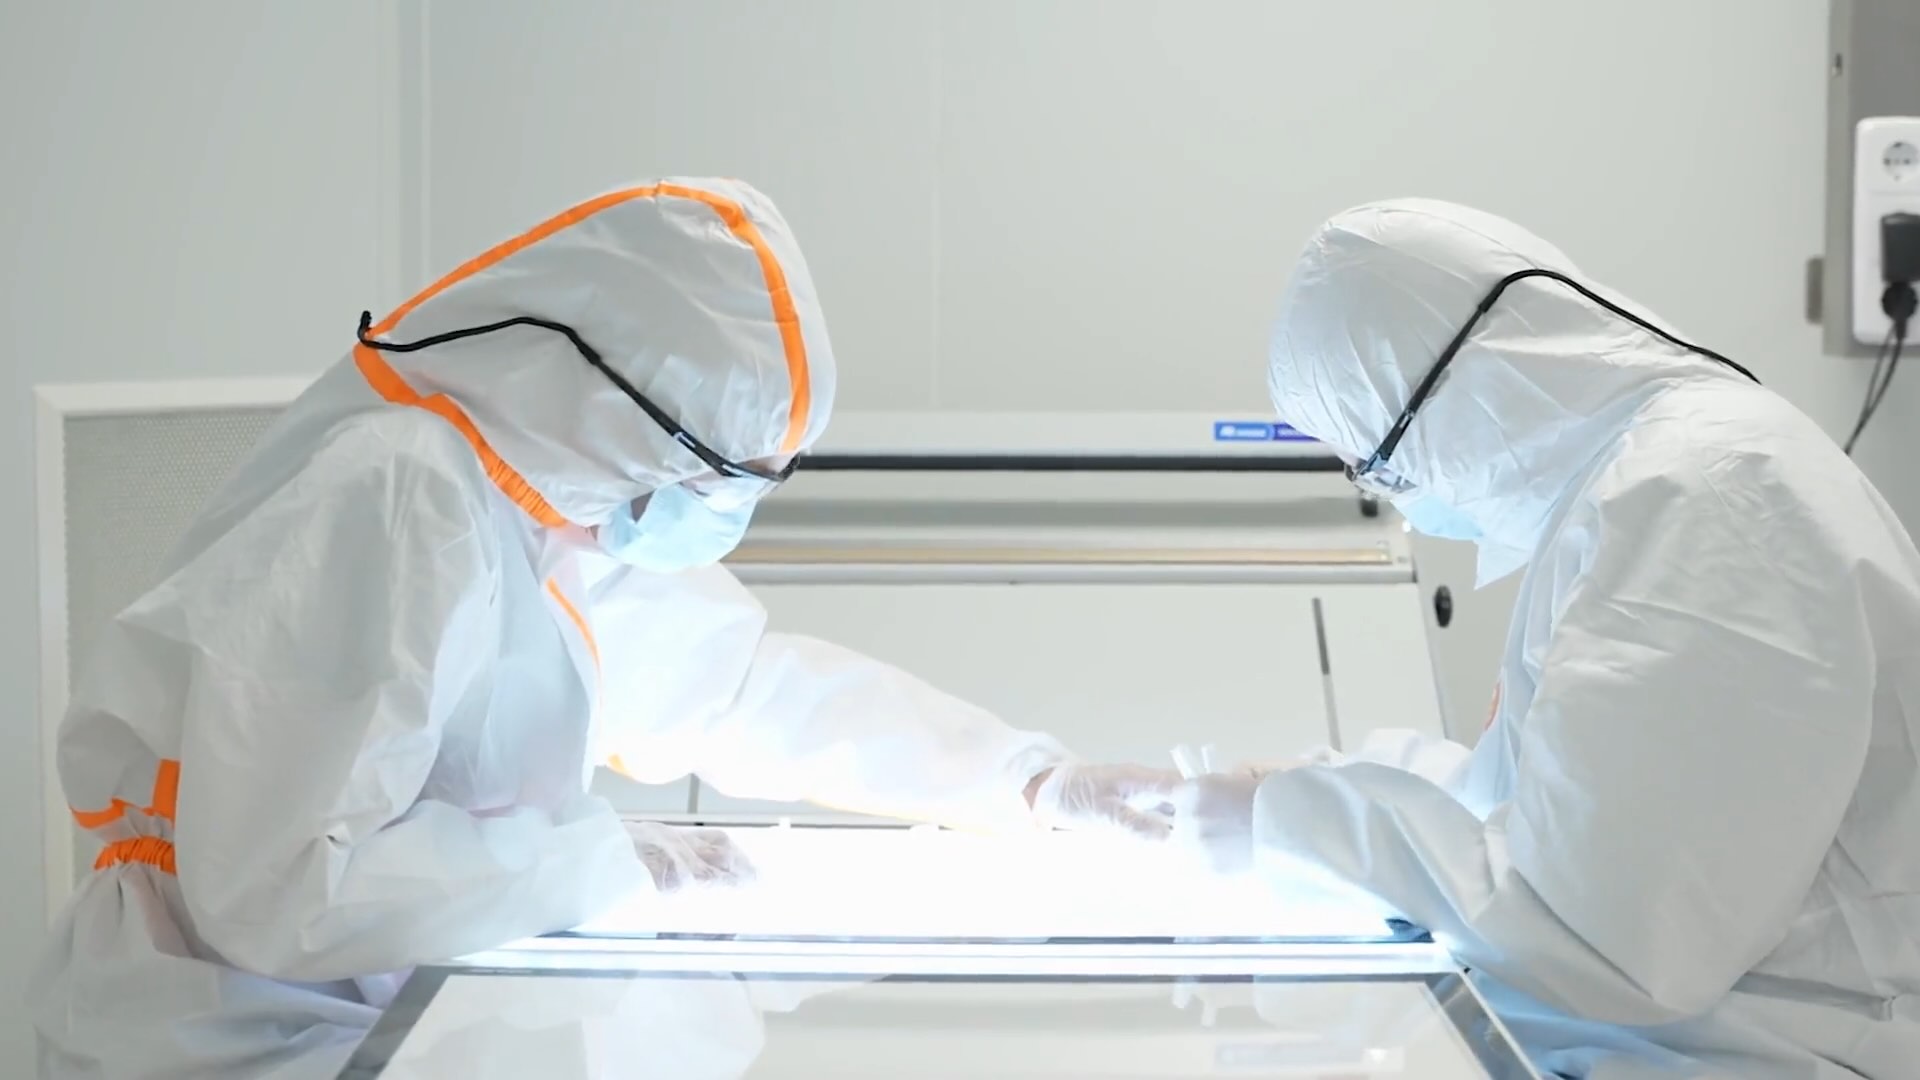 Two people covered entirely in white clothing working in a clean room in a scientific application.